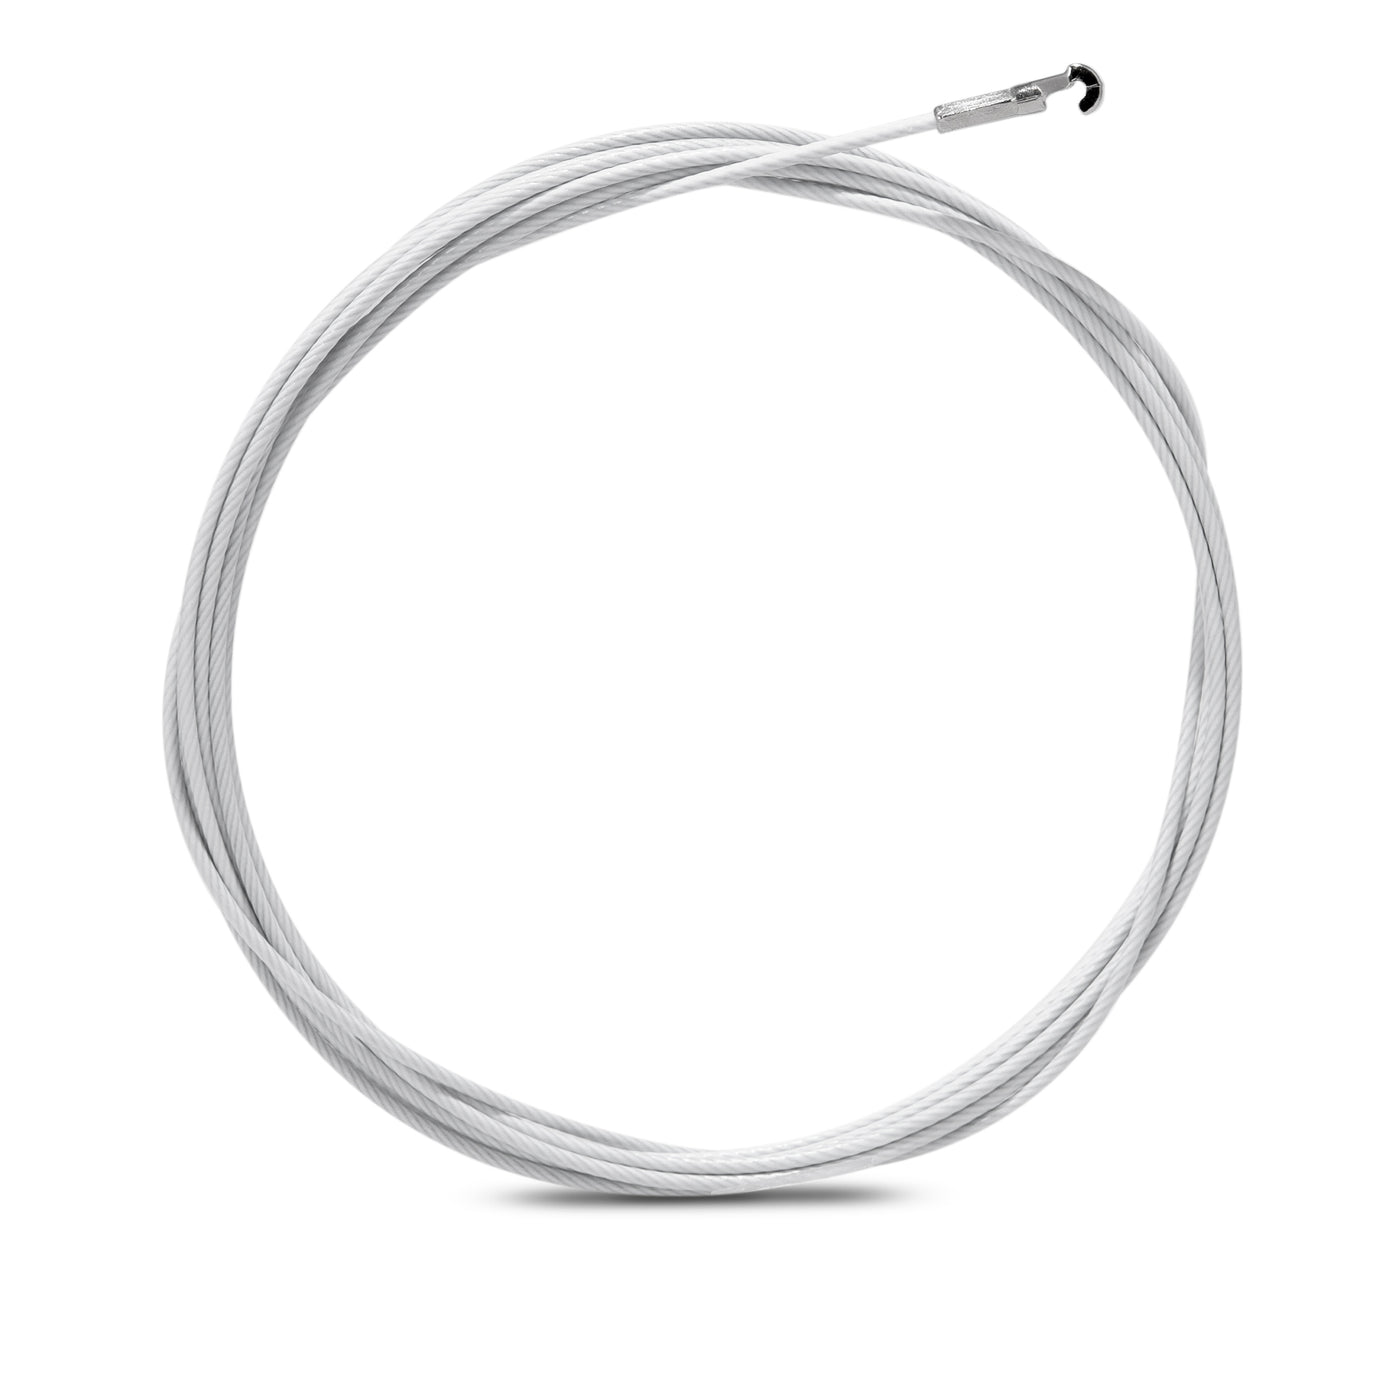 MINIRAIL CABLE  White stainless steel nylon coated cable 250cm. Capacity up to 25kg (LSC25W)